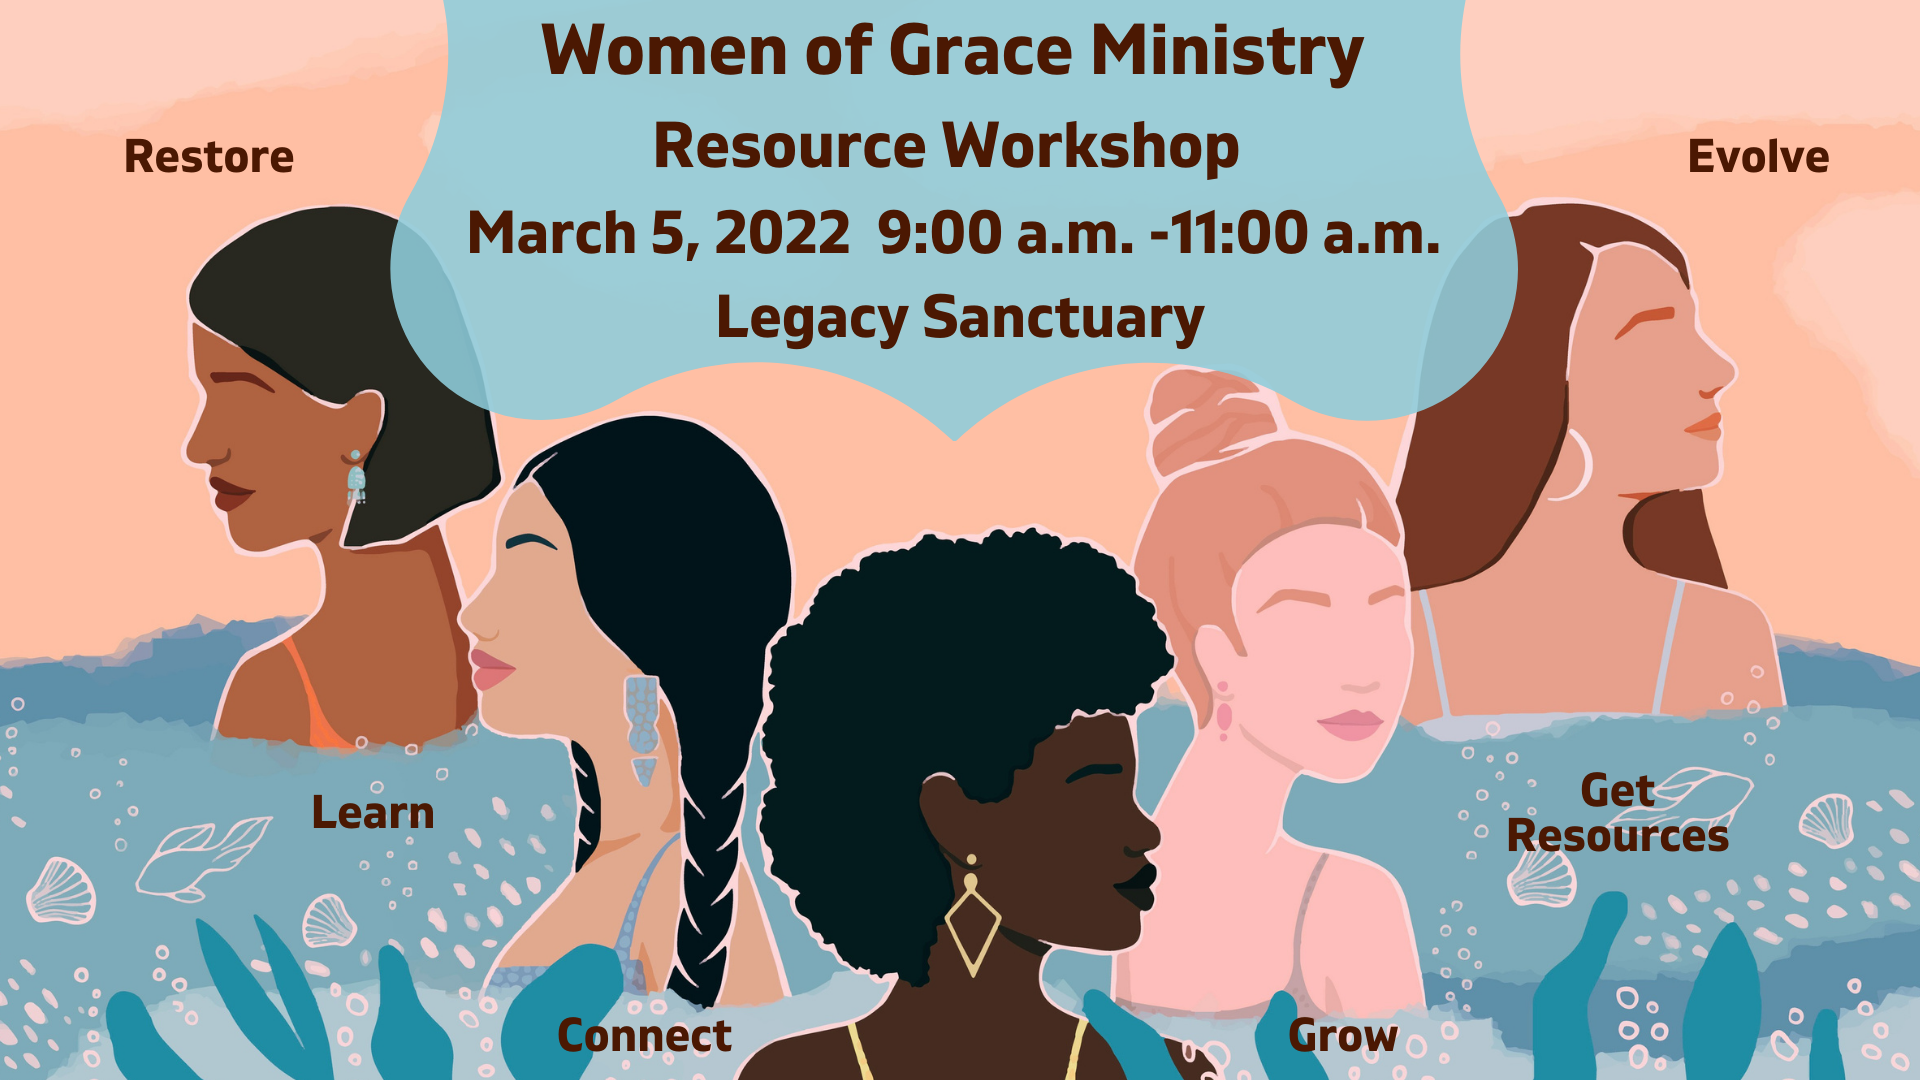 Women of Grace Ministry Resource Workshop Event head image